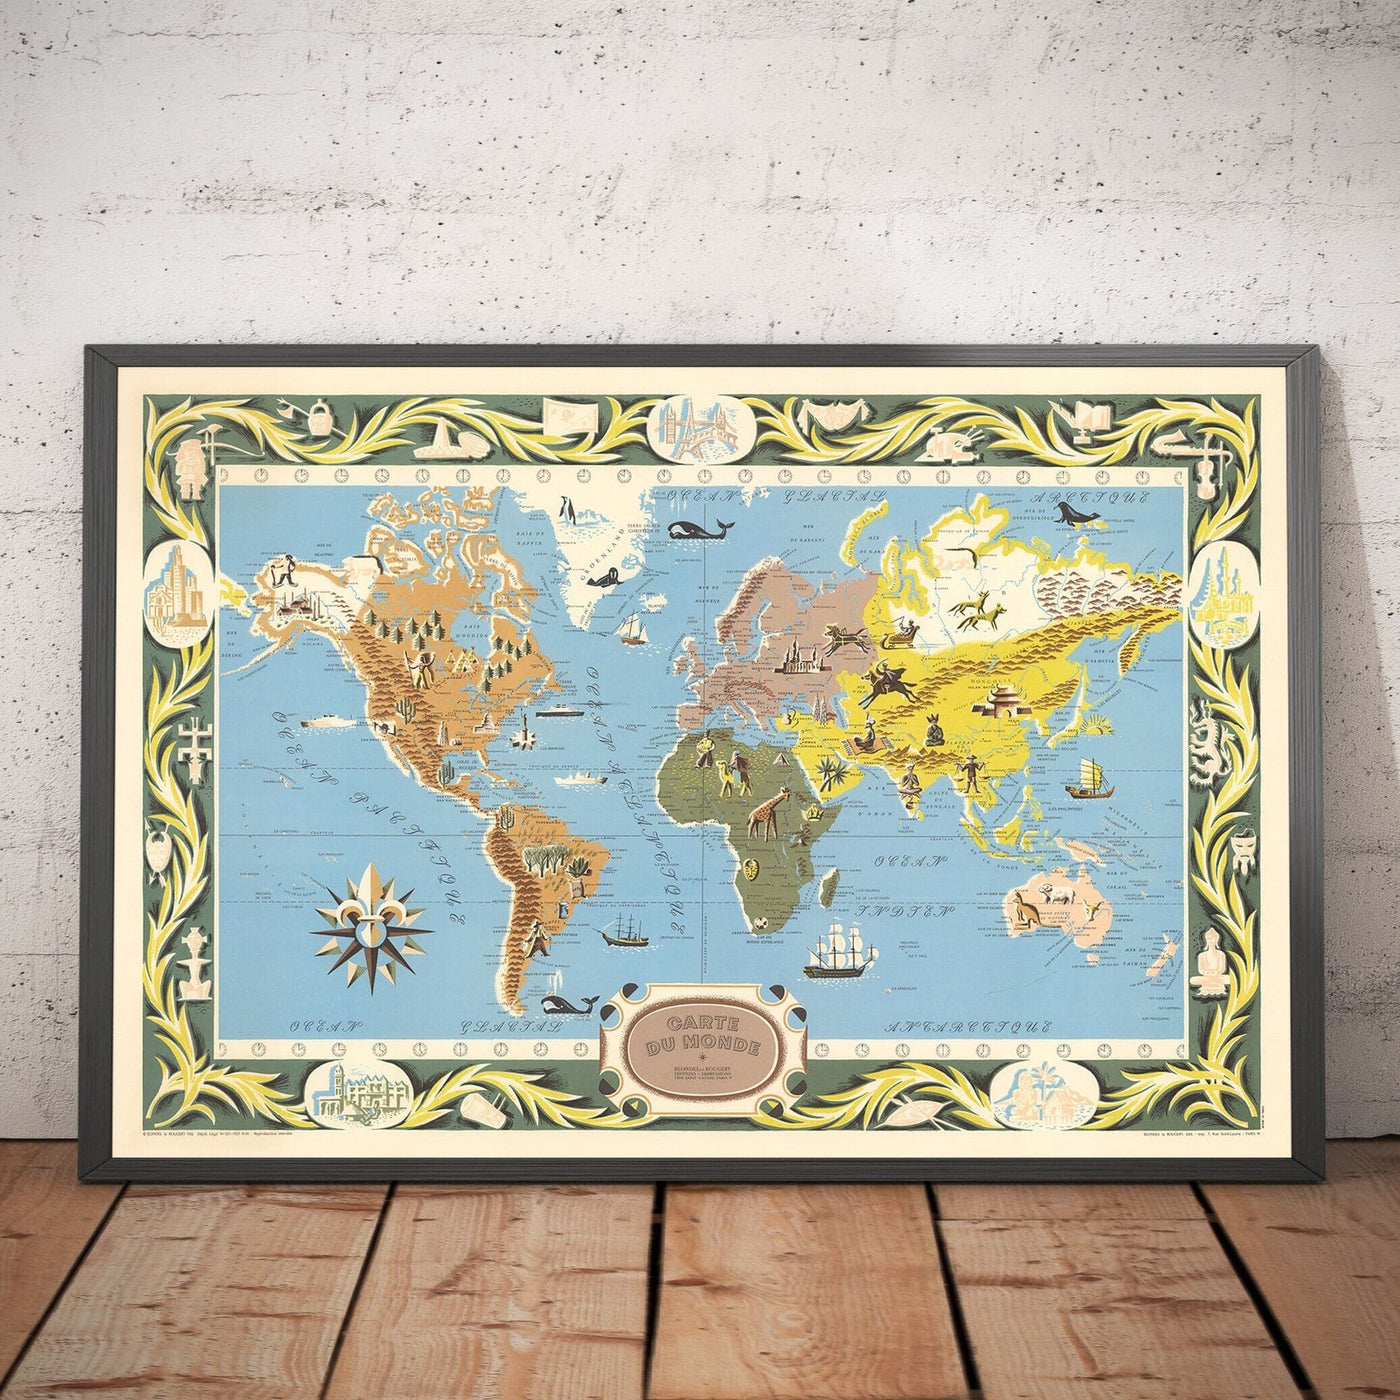 Old French World Map, 1956 - Carte du Monde Atlas by Blondel La Rougery - Sea Monsters, Time Zones